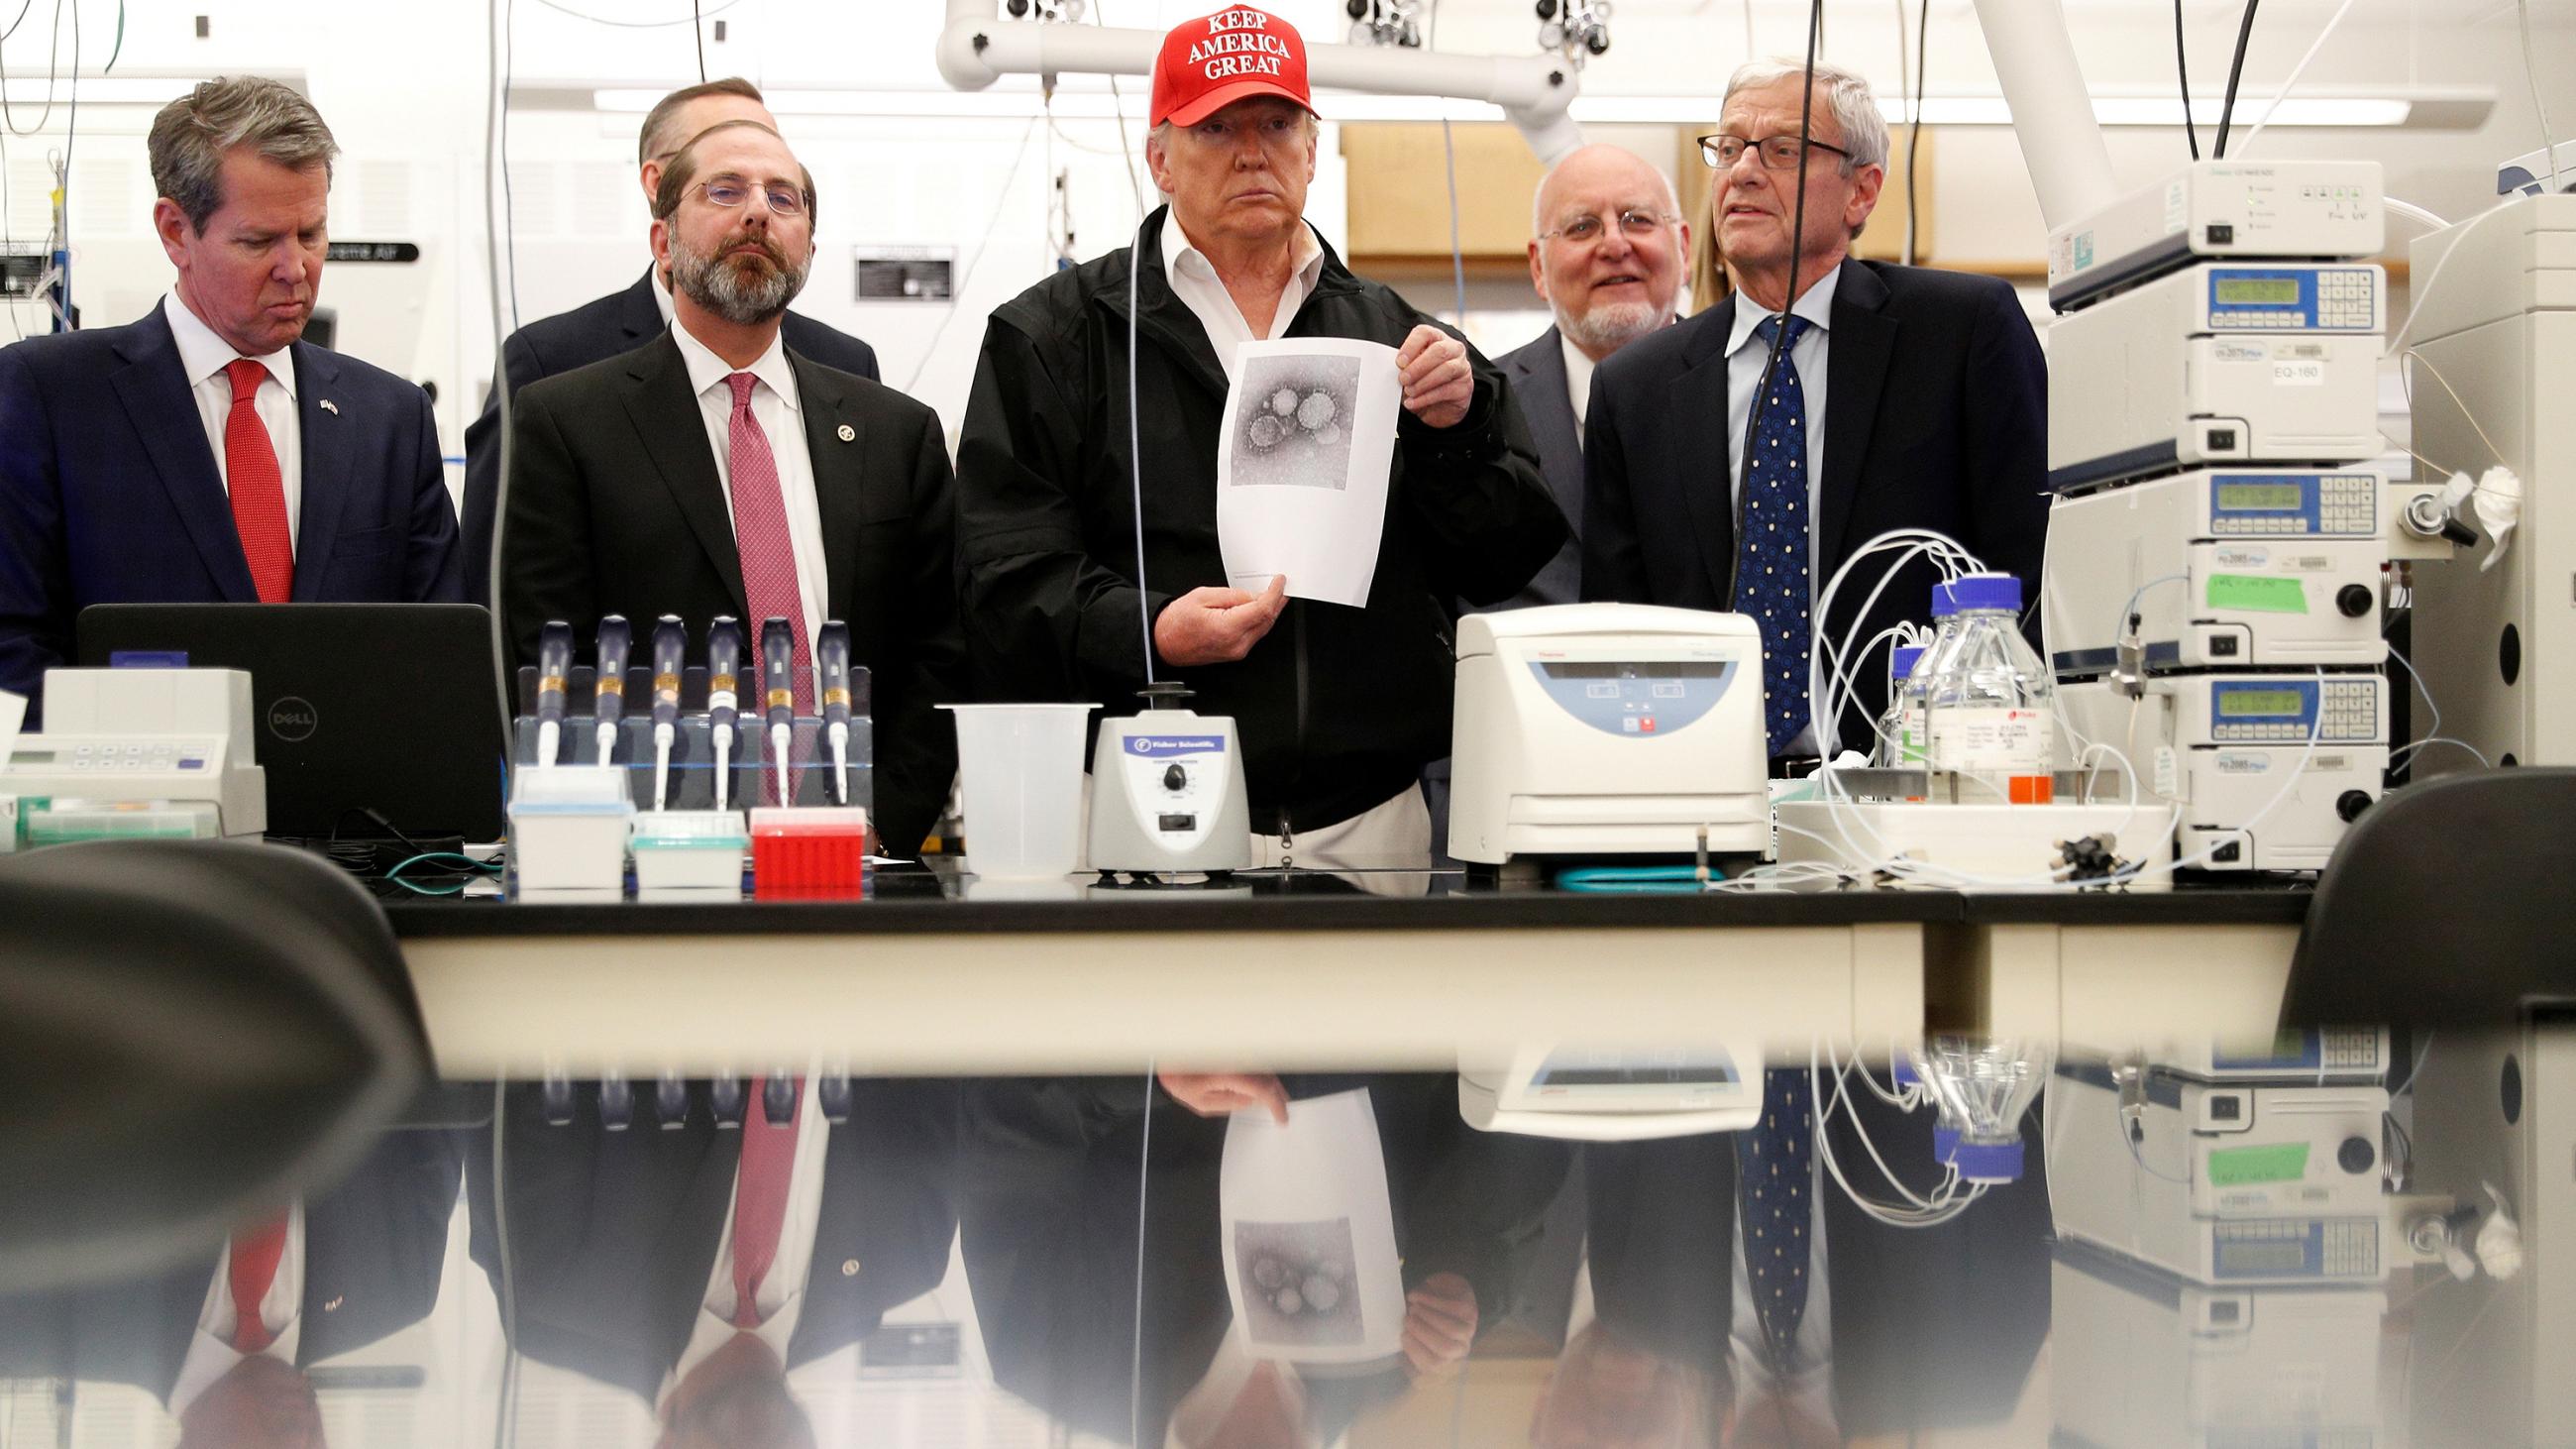 The photo shows President Trump and several others in a laboratory setting. The president is wearing a red "Make America Great Again" hat. 